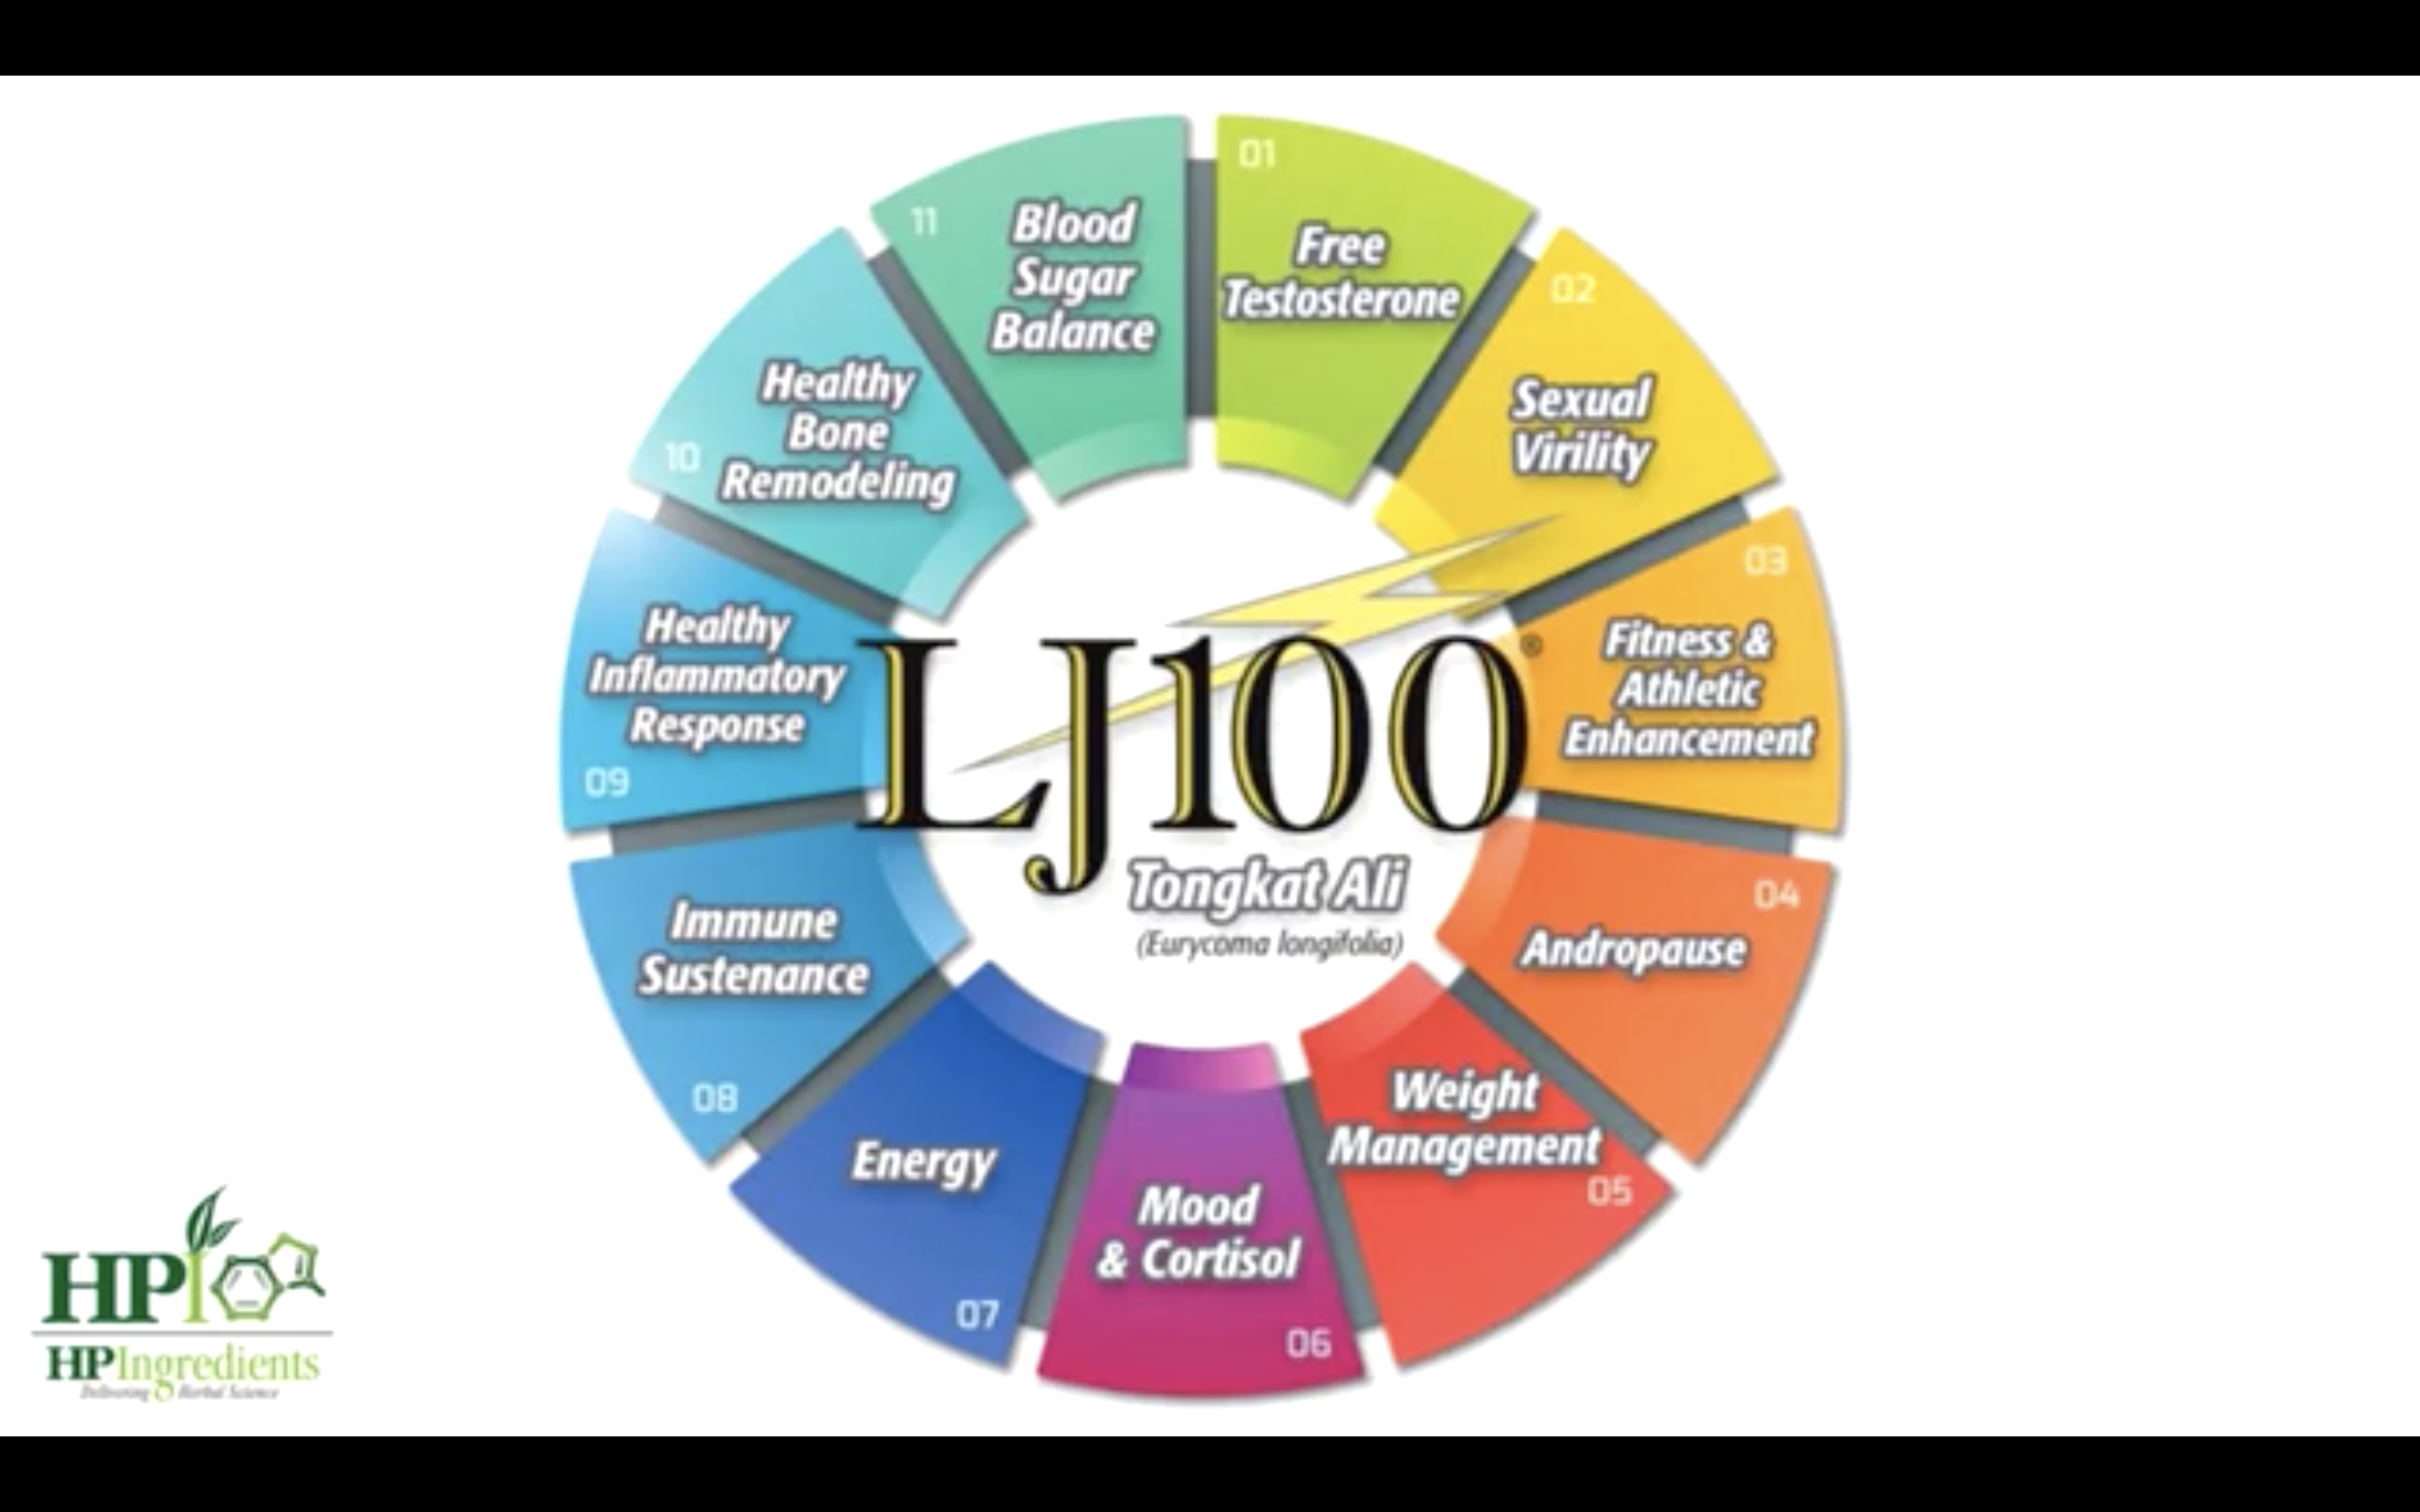 What is LJ100